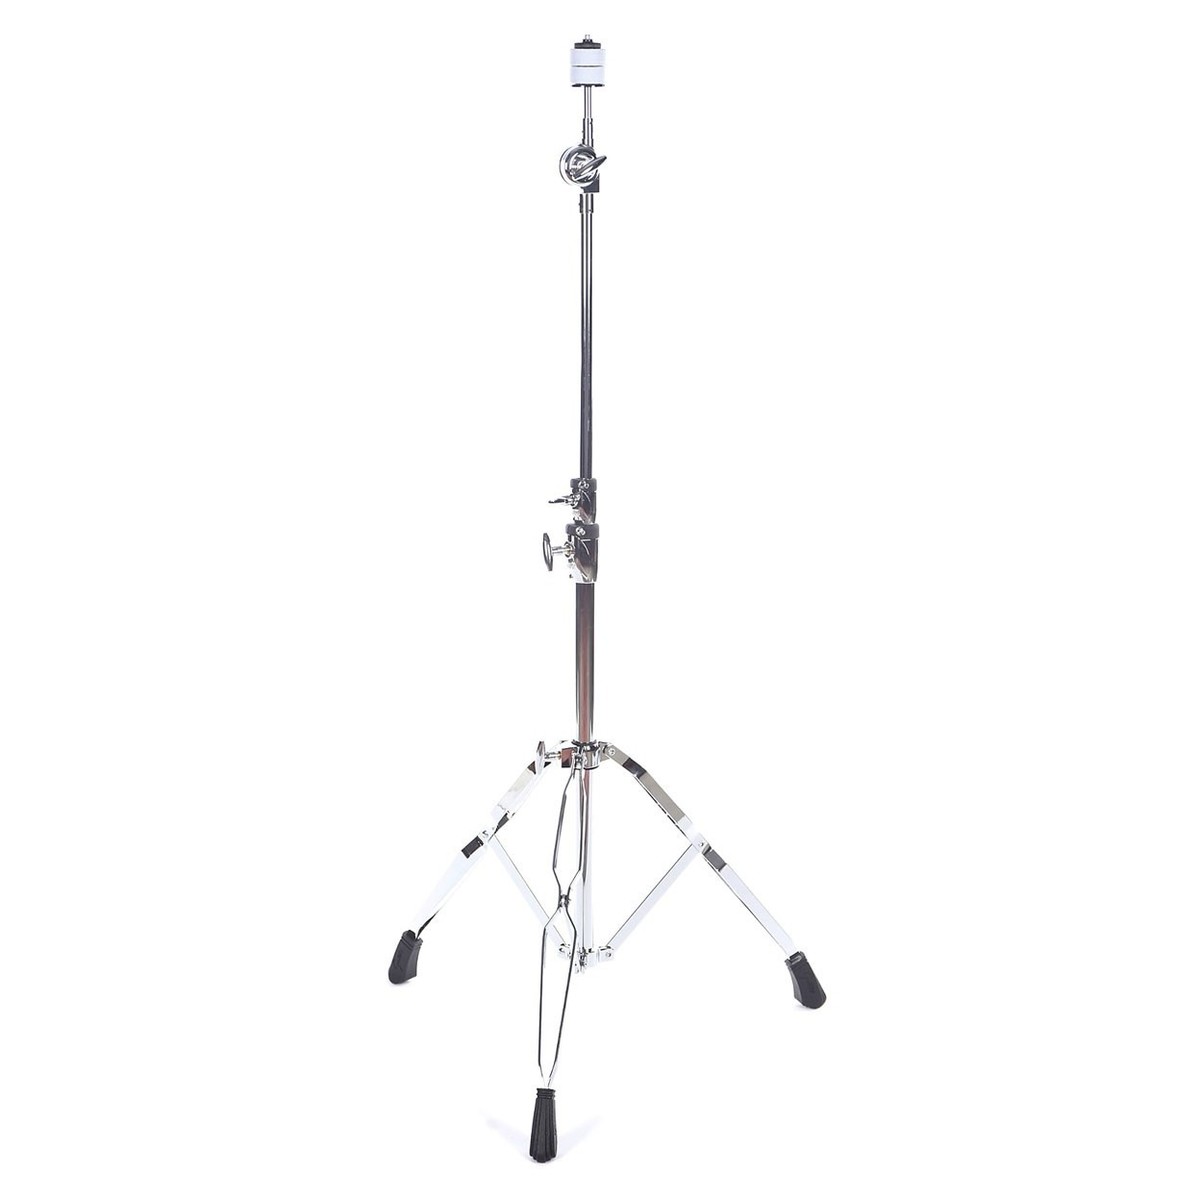 An image of Gretsch G3 Series Straight Cymbal Stand | PMT Online